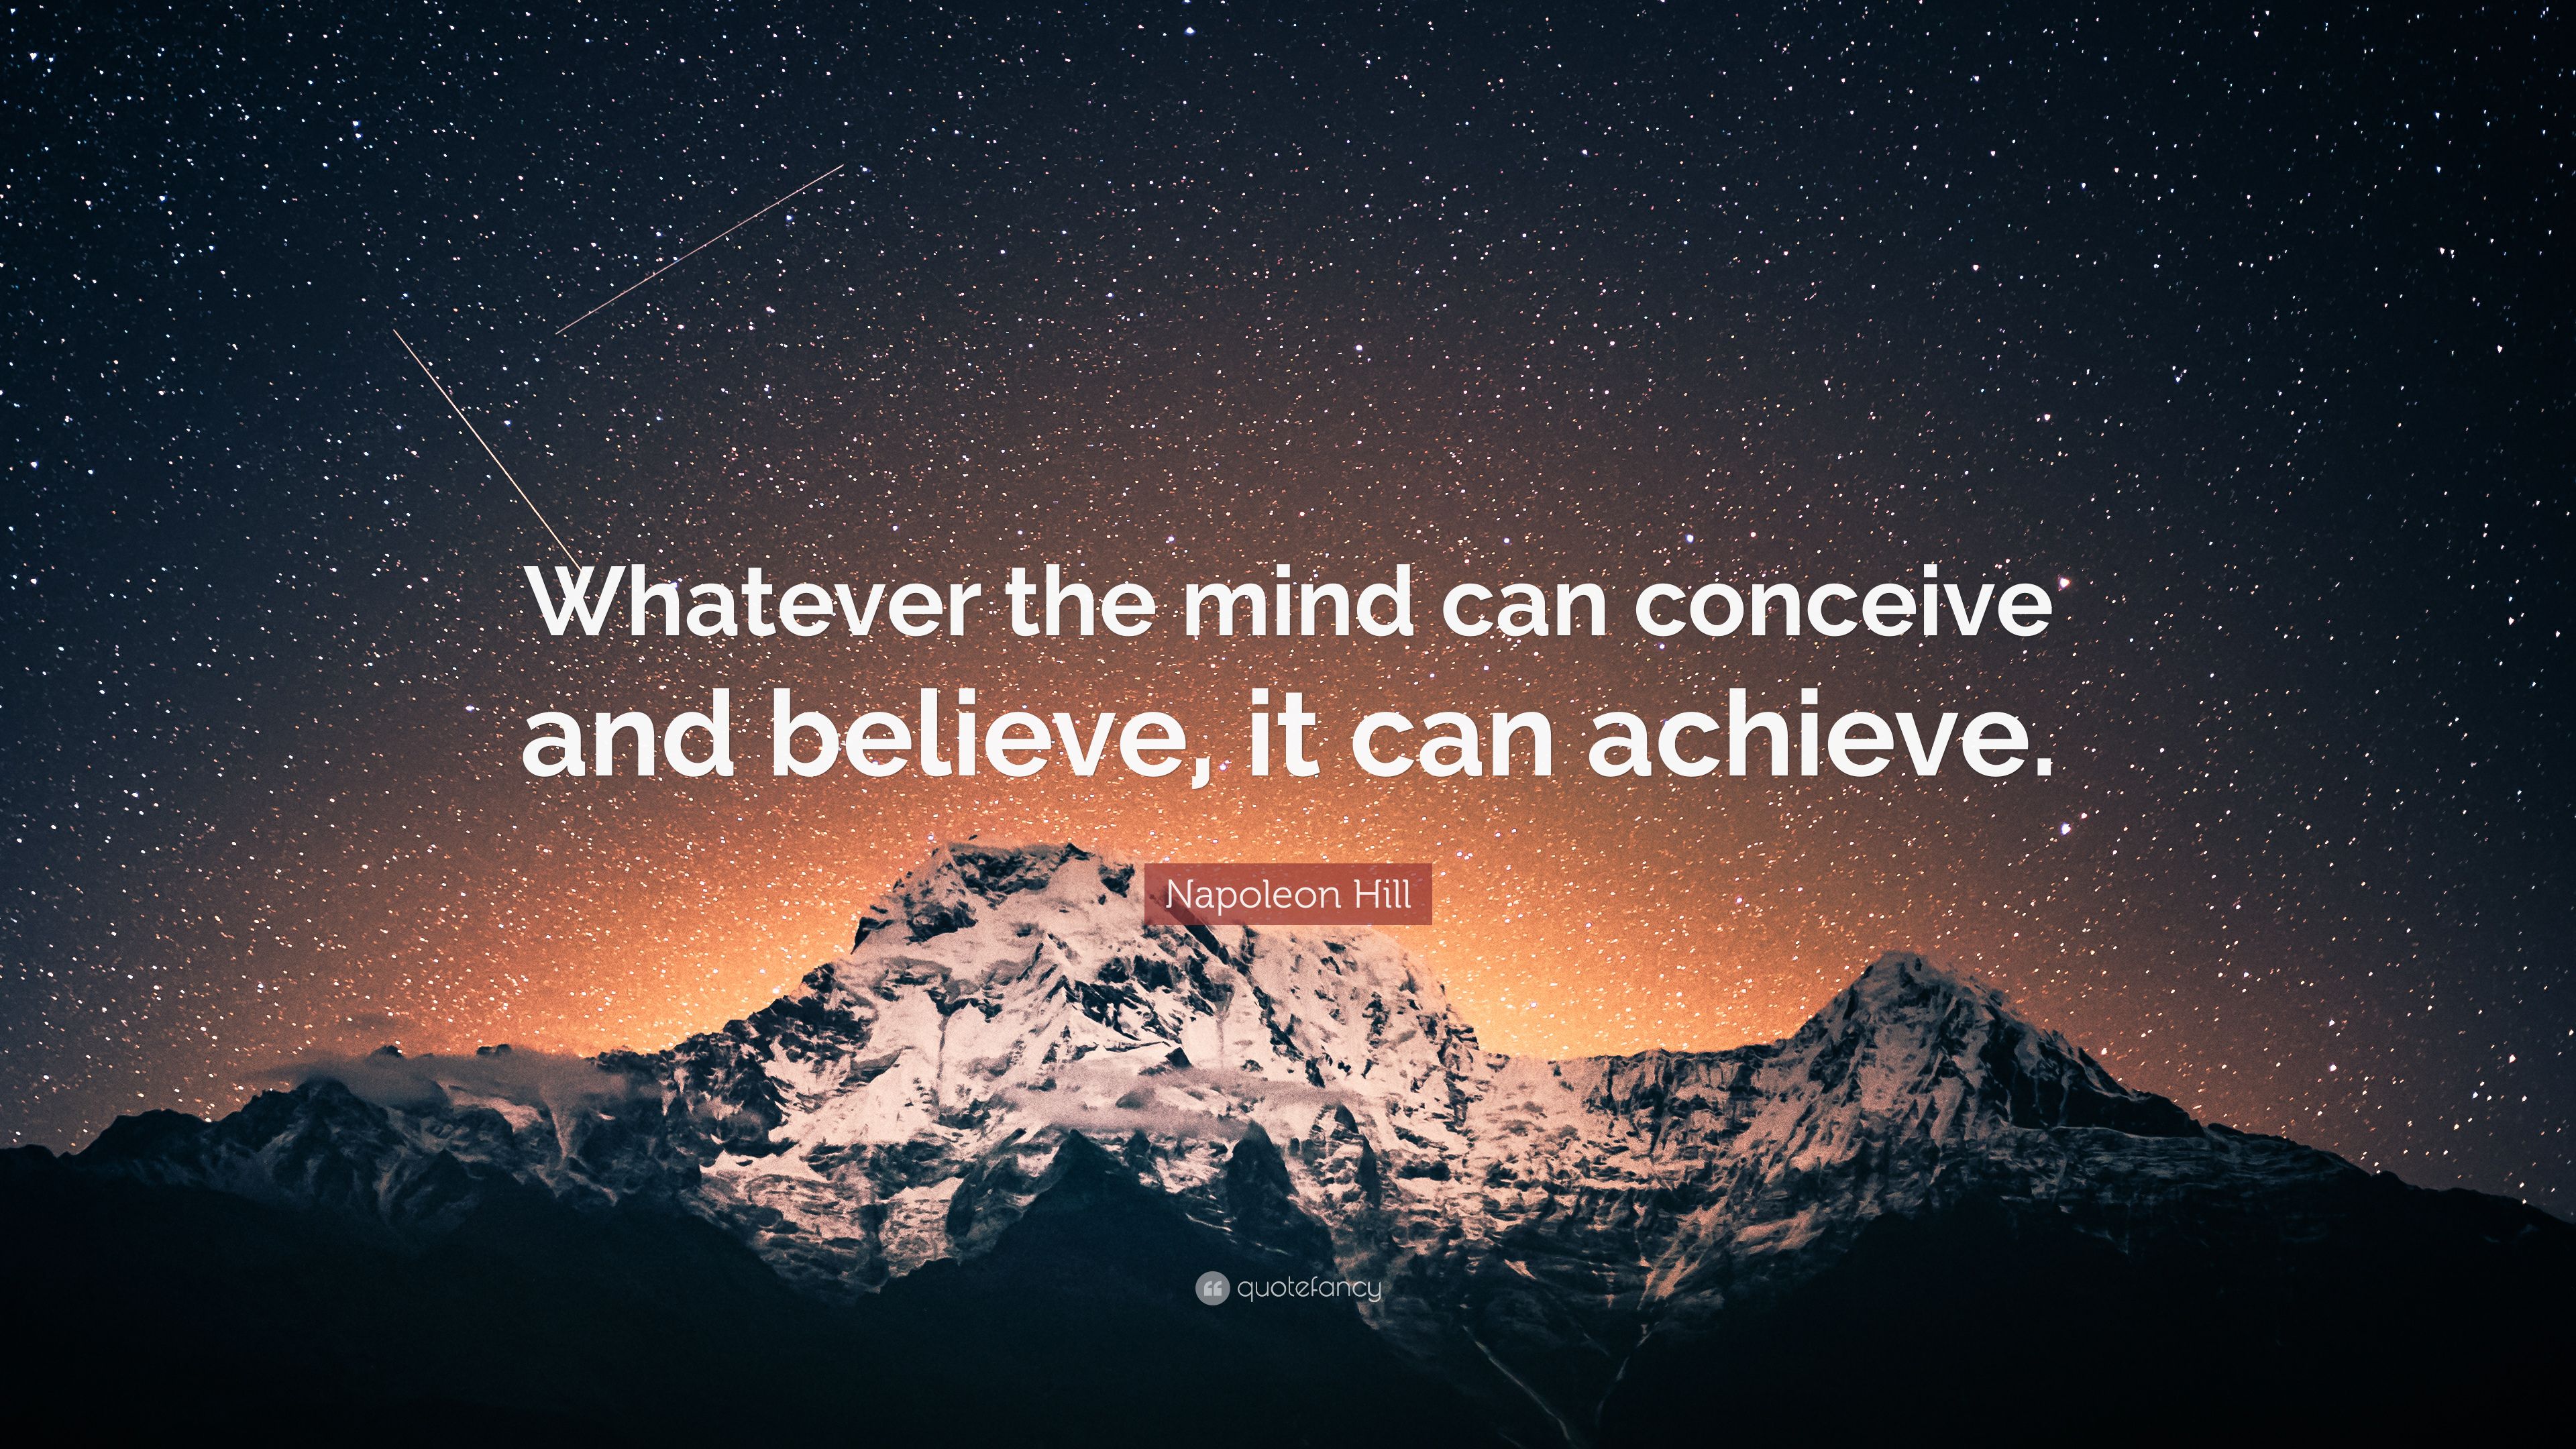 Napoleon Hill Quote: “Whatever the mind can conceive and believe, it